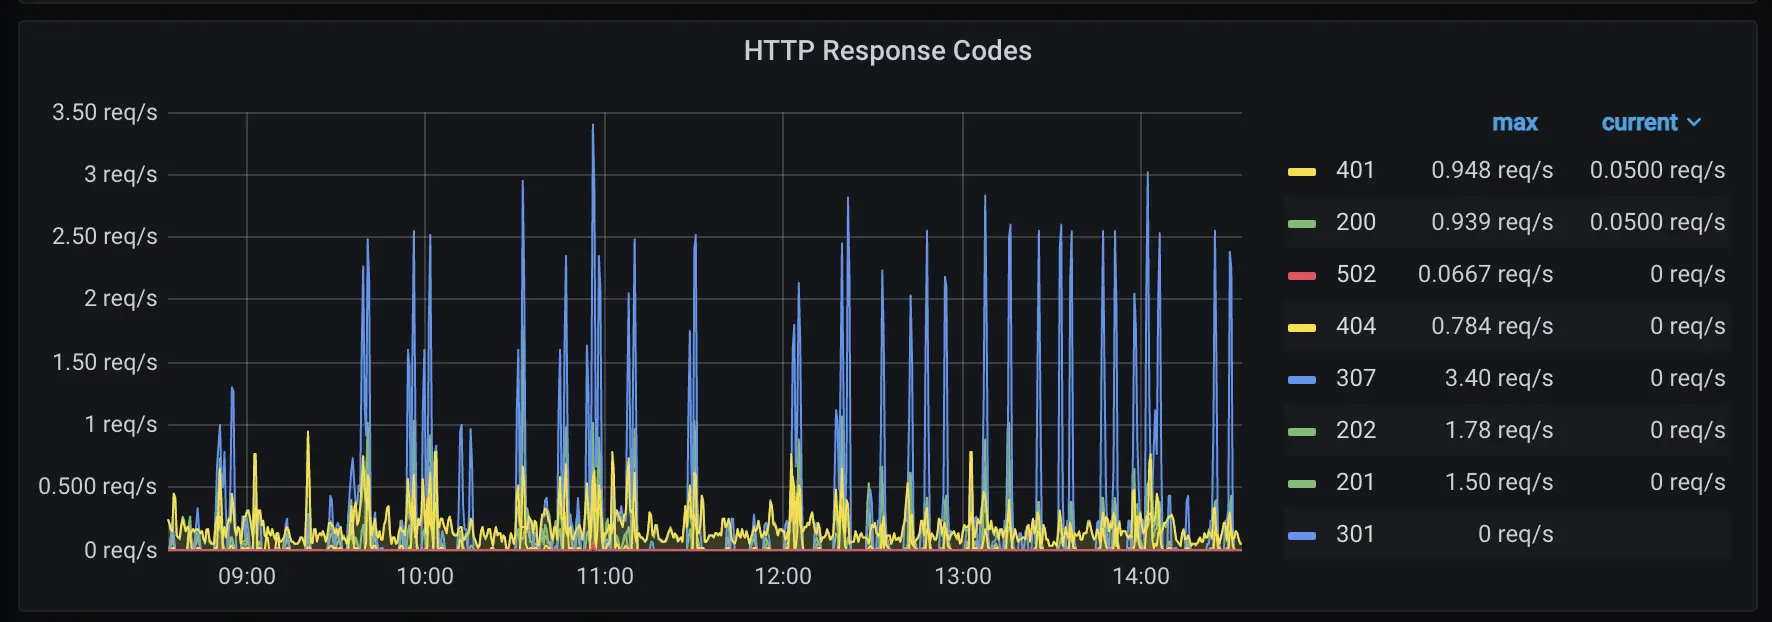 A graph of HTTP response codes